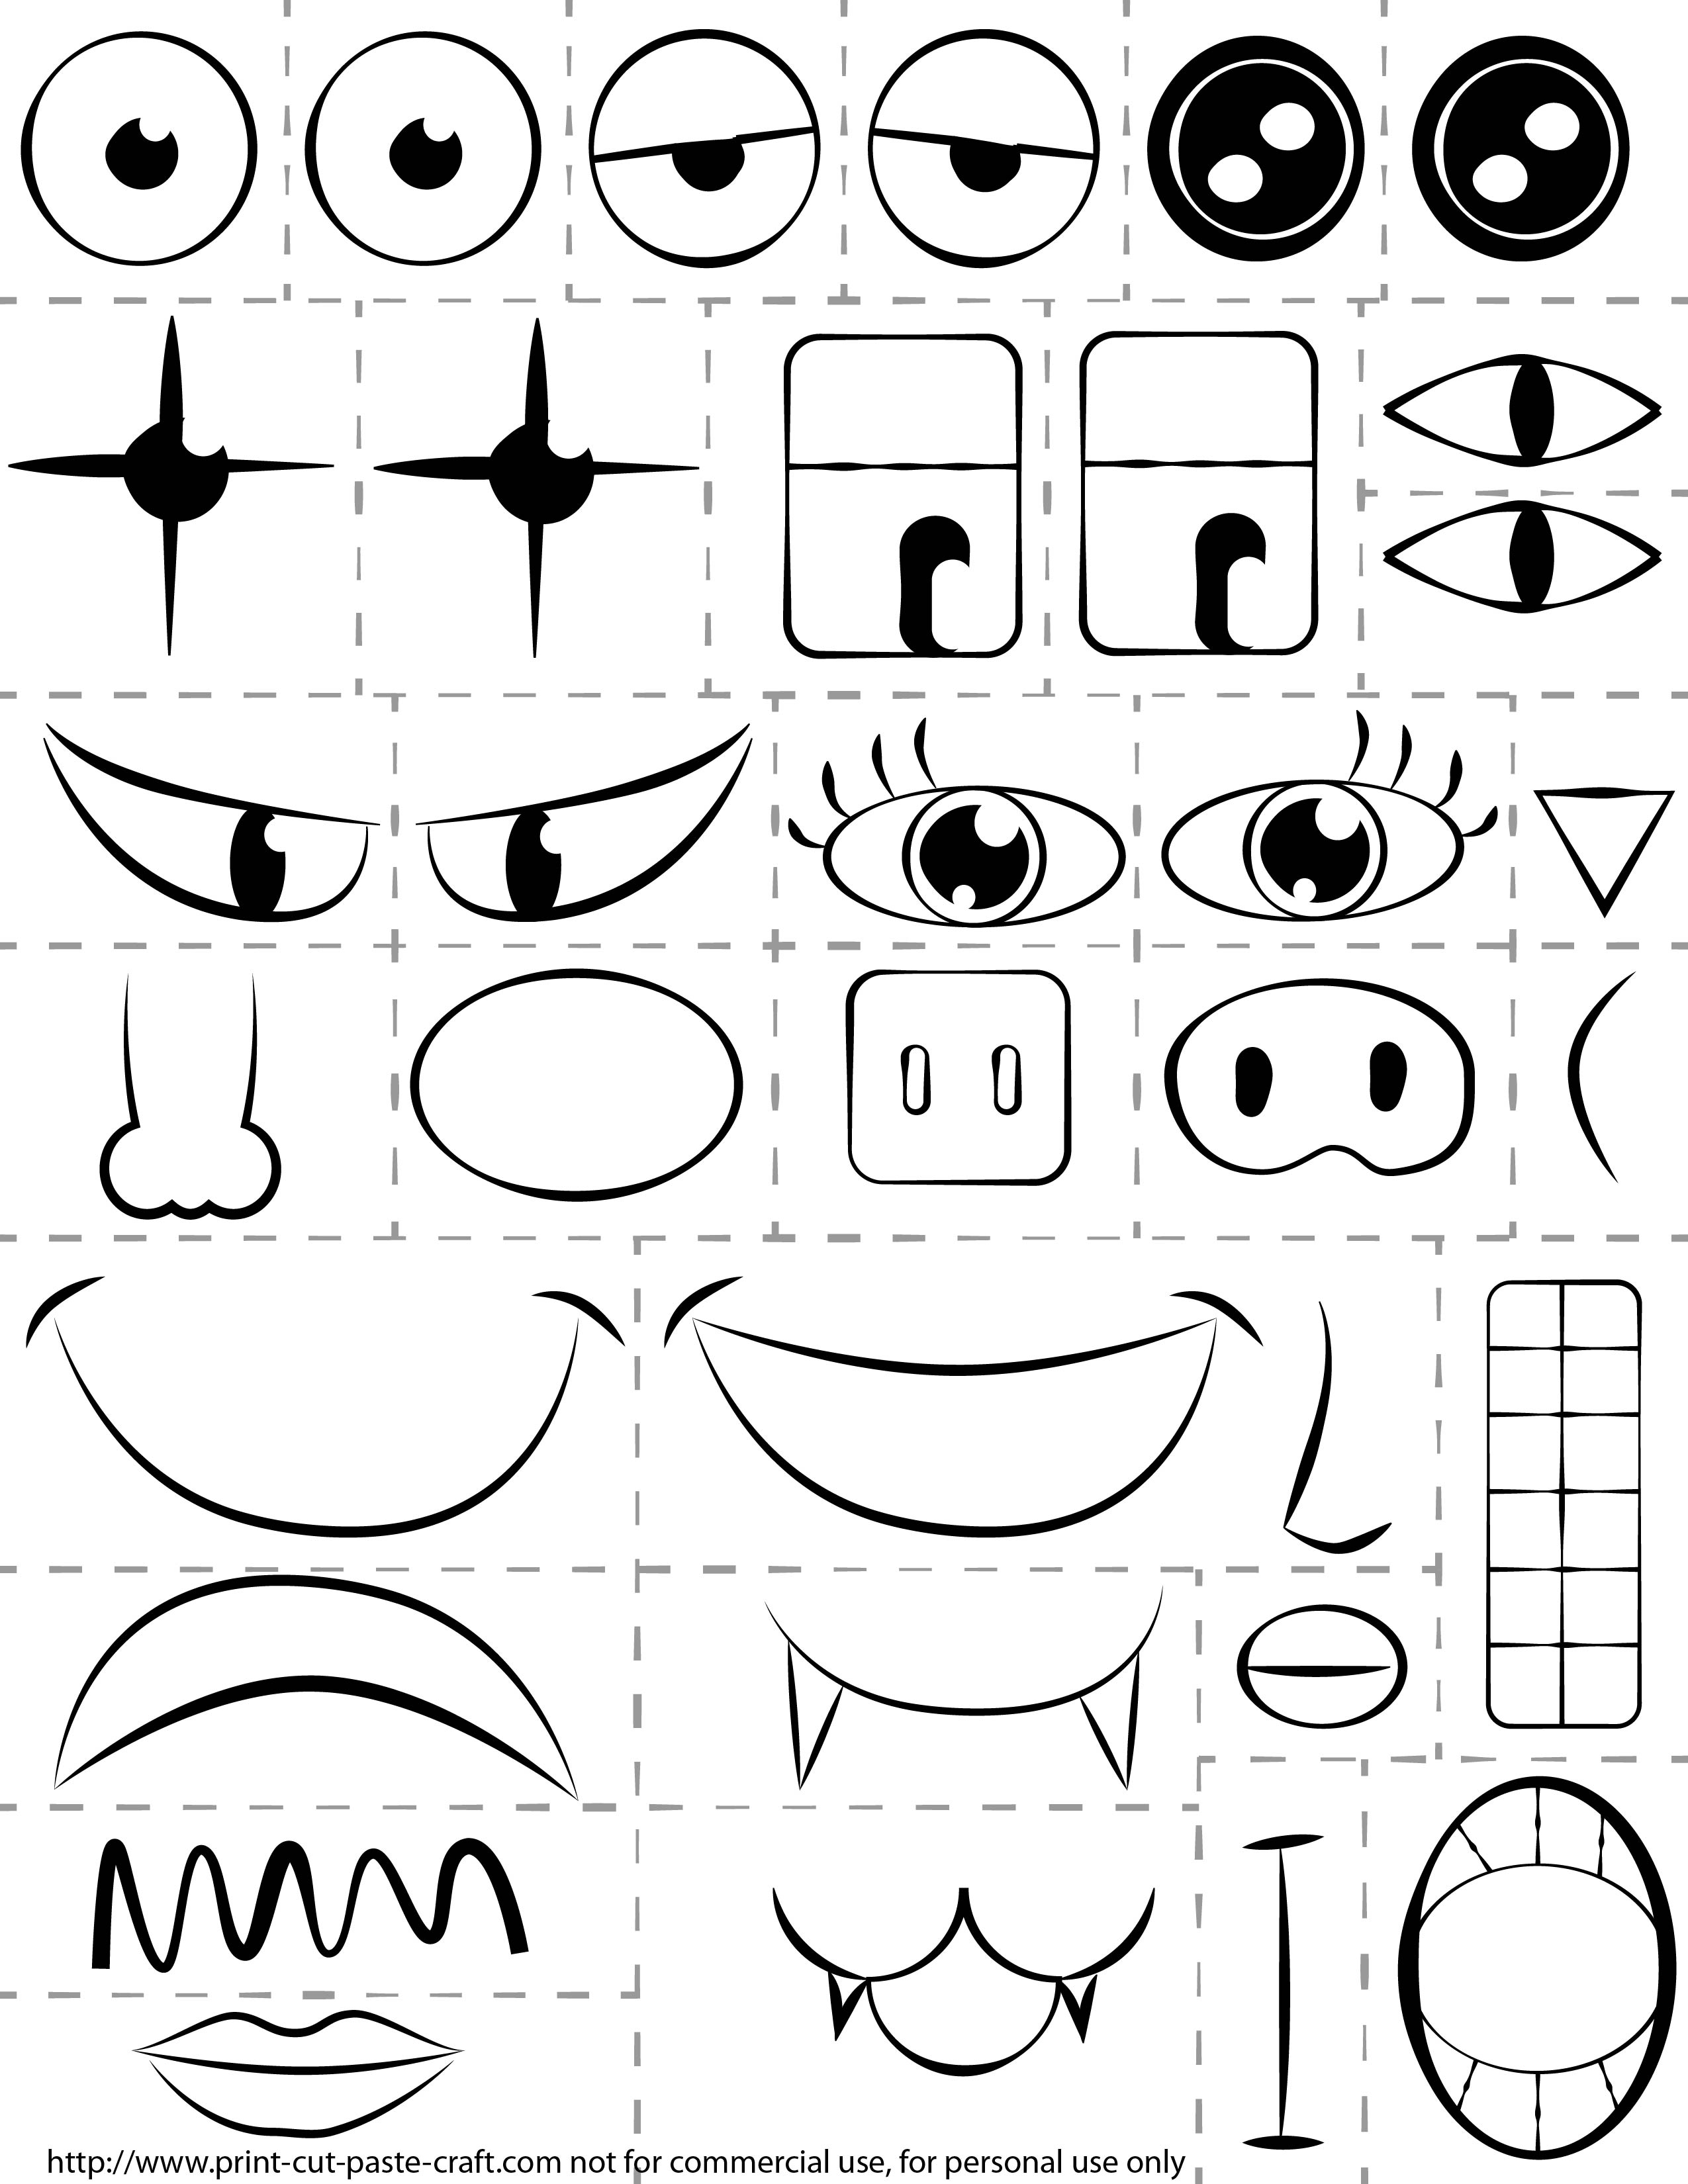 6 Best Images of Funny Face Parts Printable - Printable Funny Faces ...